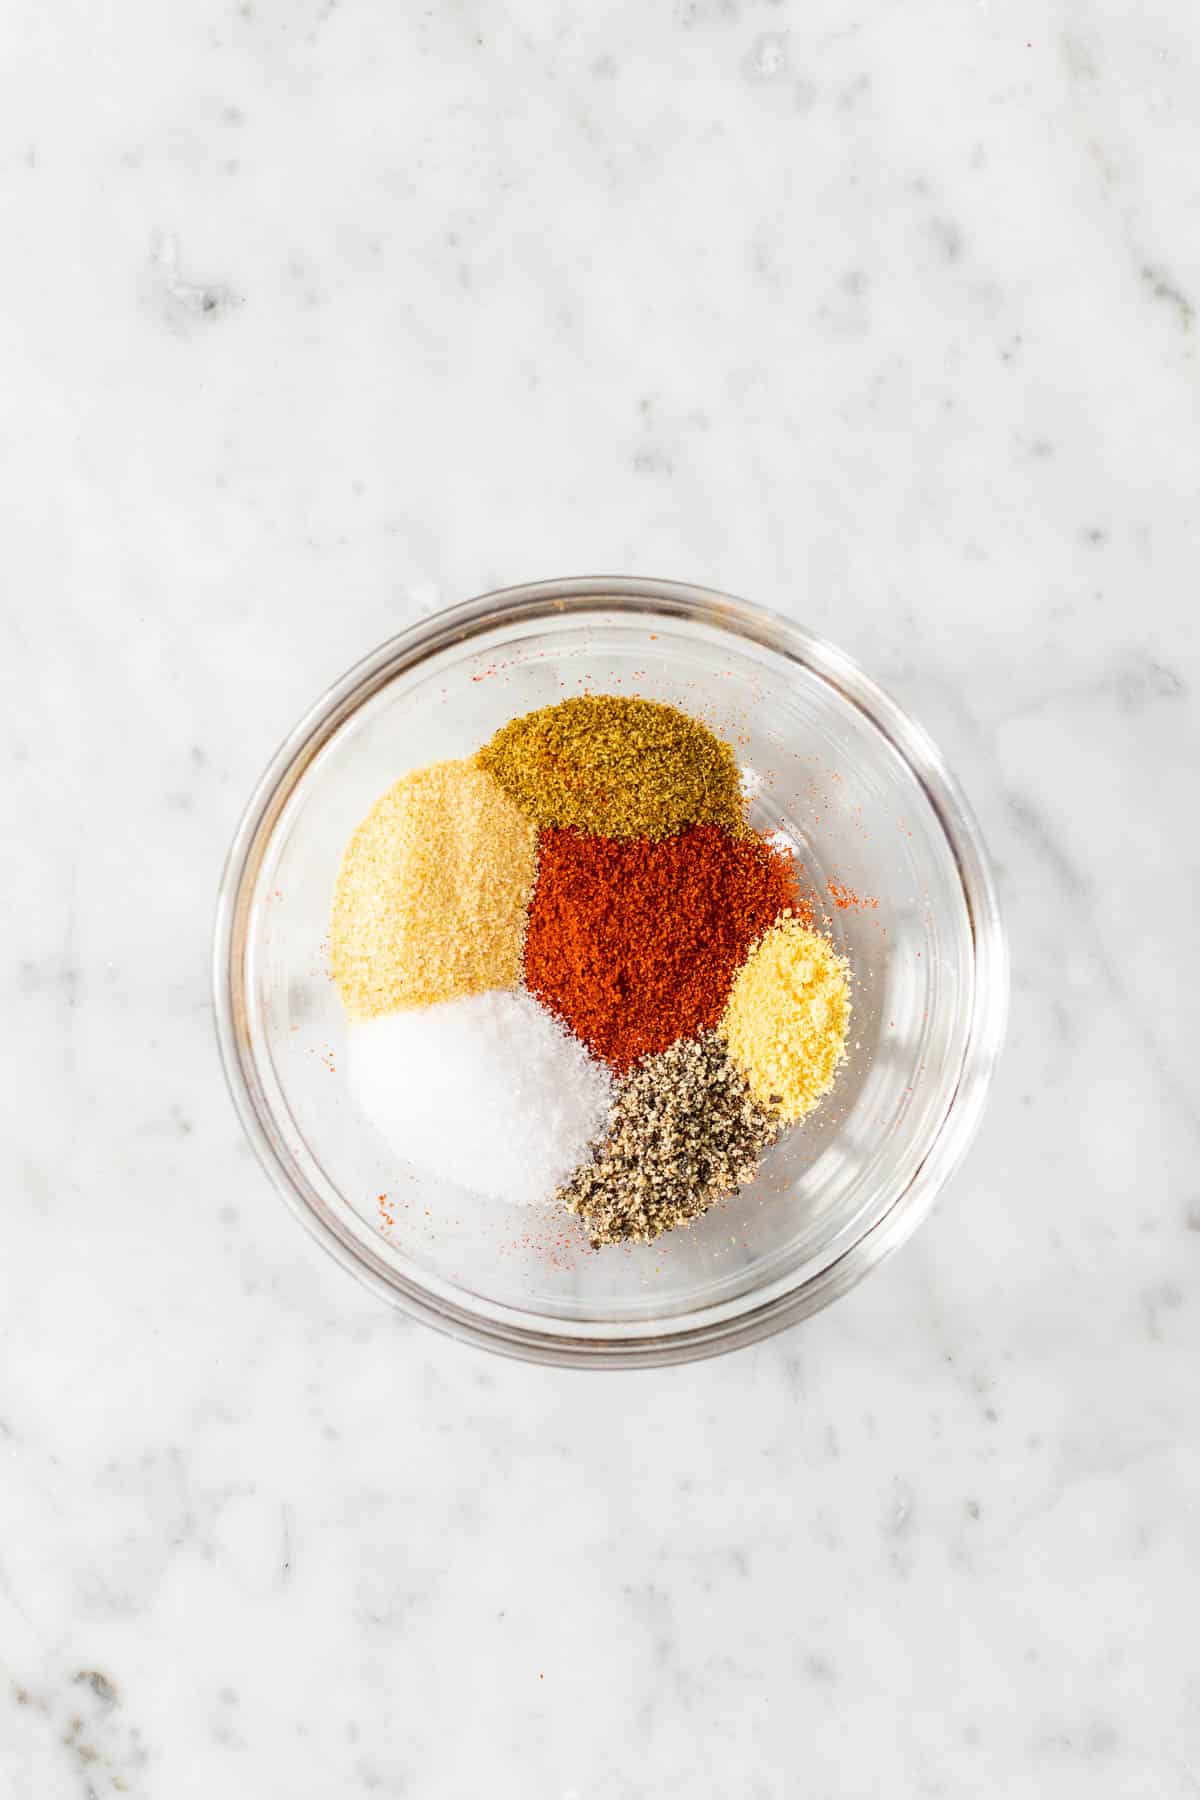 Different spices and seasonings in a small glass bowl.